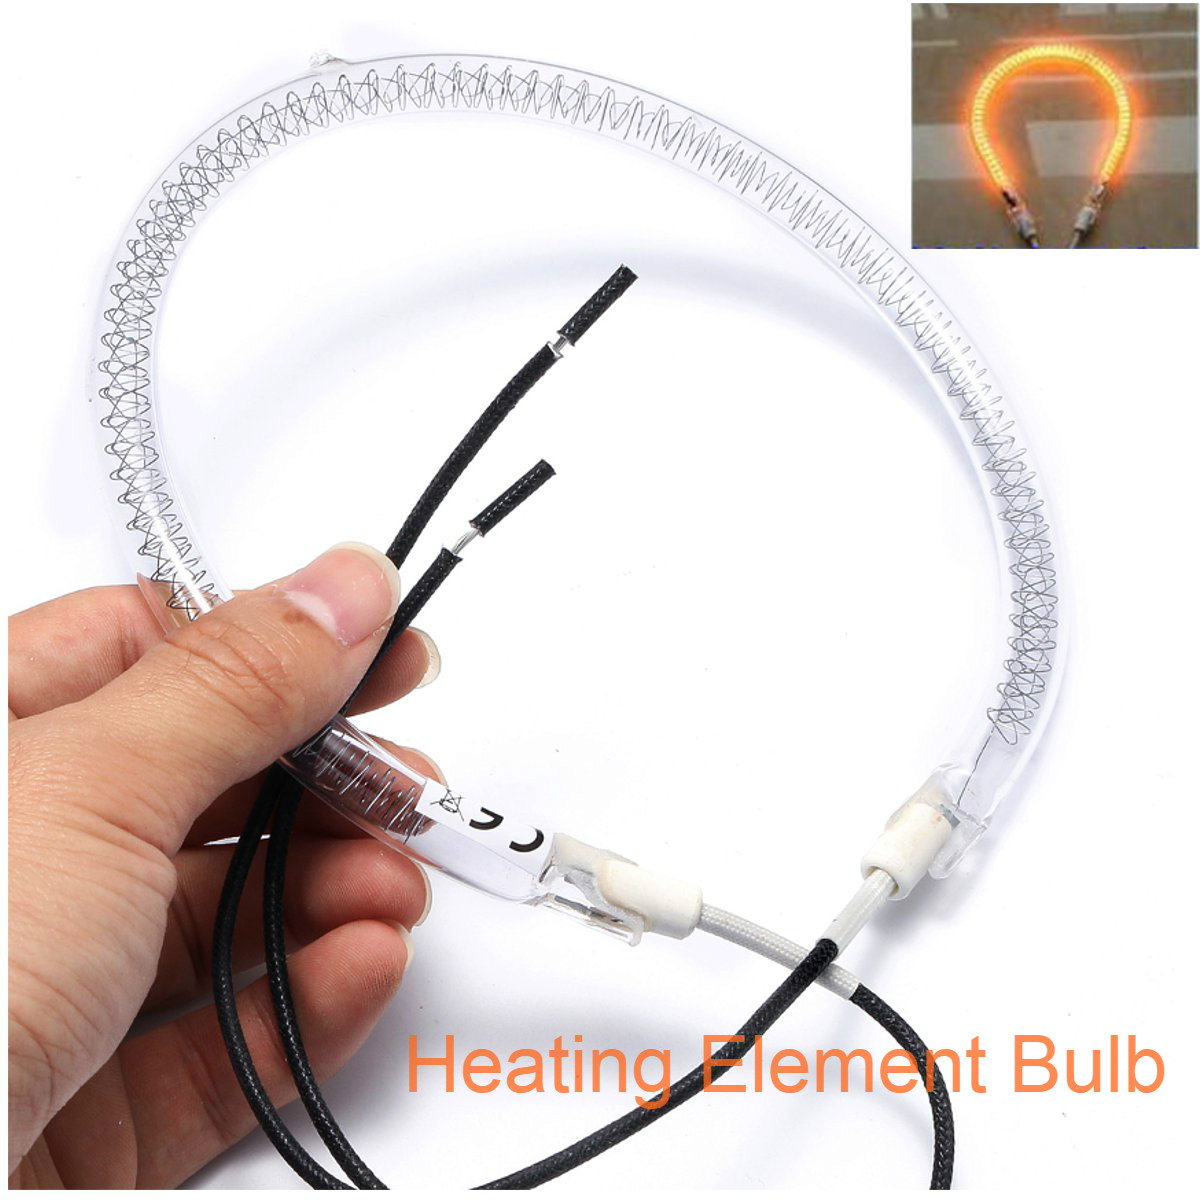 Halogen-Oven-Cooker-Heating-Element-Bulb-Replacement-Spare-Parts-1200W-1400W-1752678